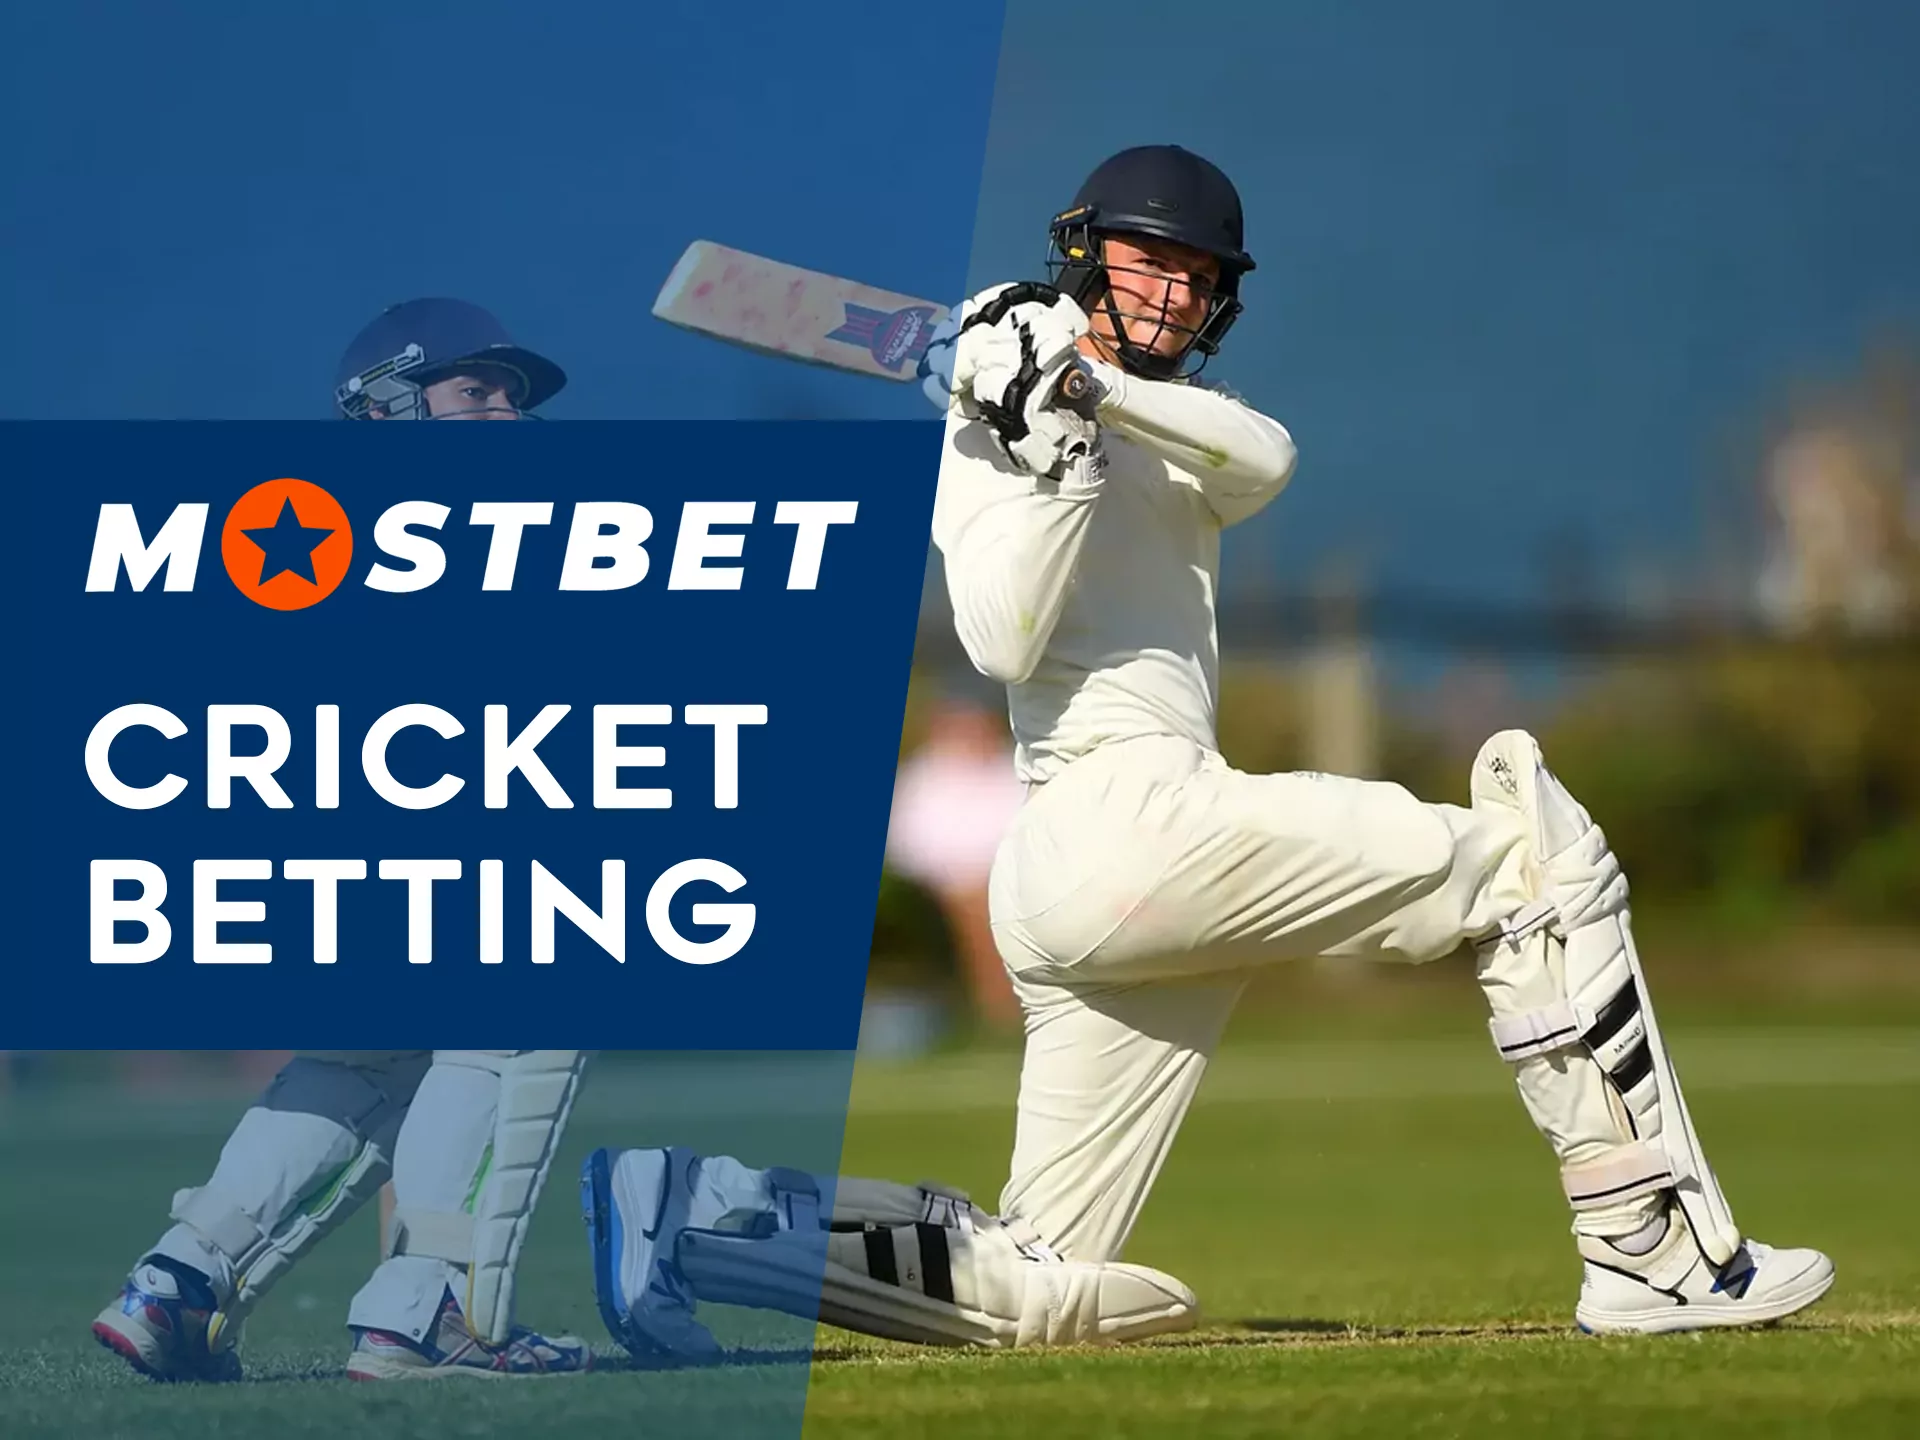 A wide range of cricket betting outcomes is available at Mostbet.